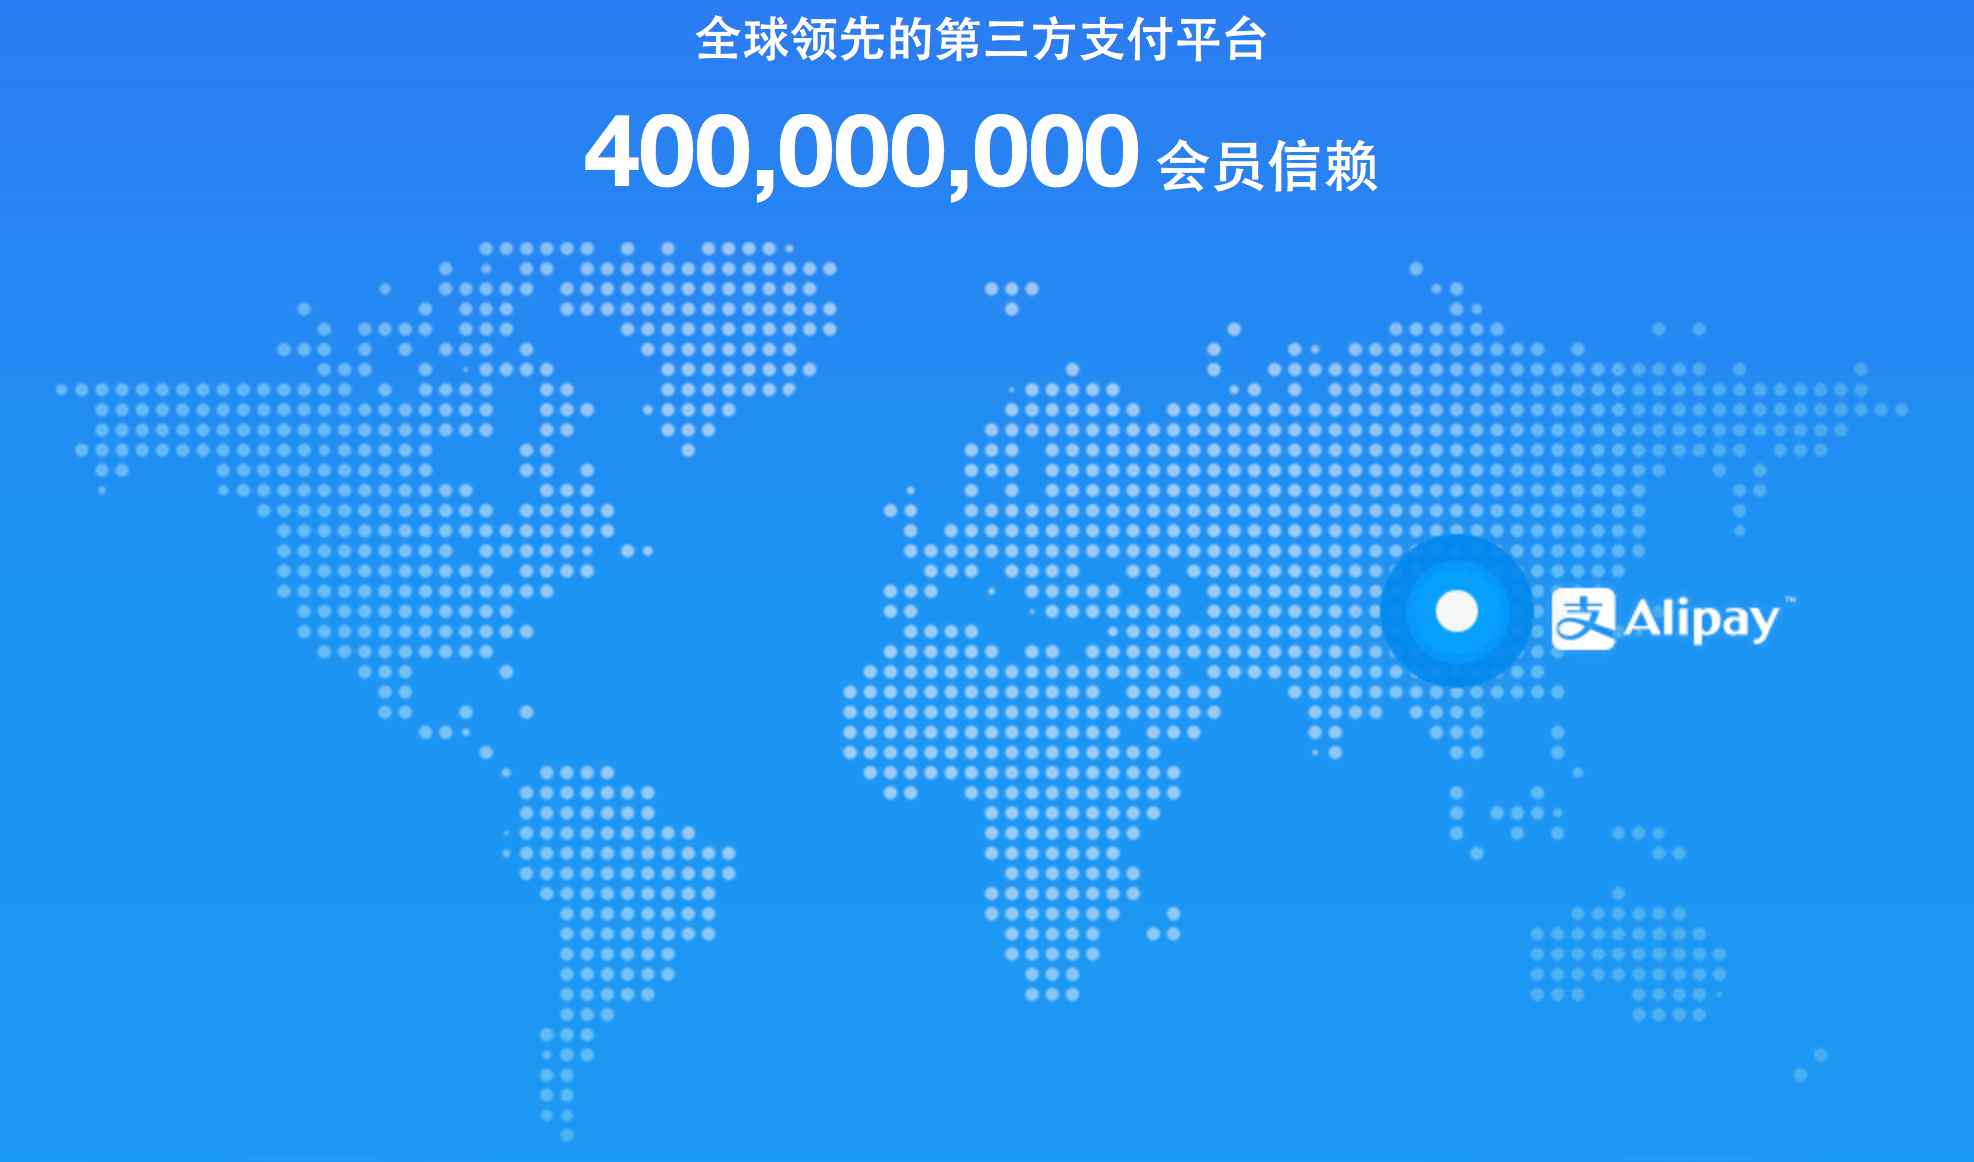 How Chinese Mobile Payments Are Quietly Conquering the World